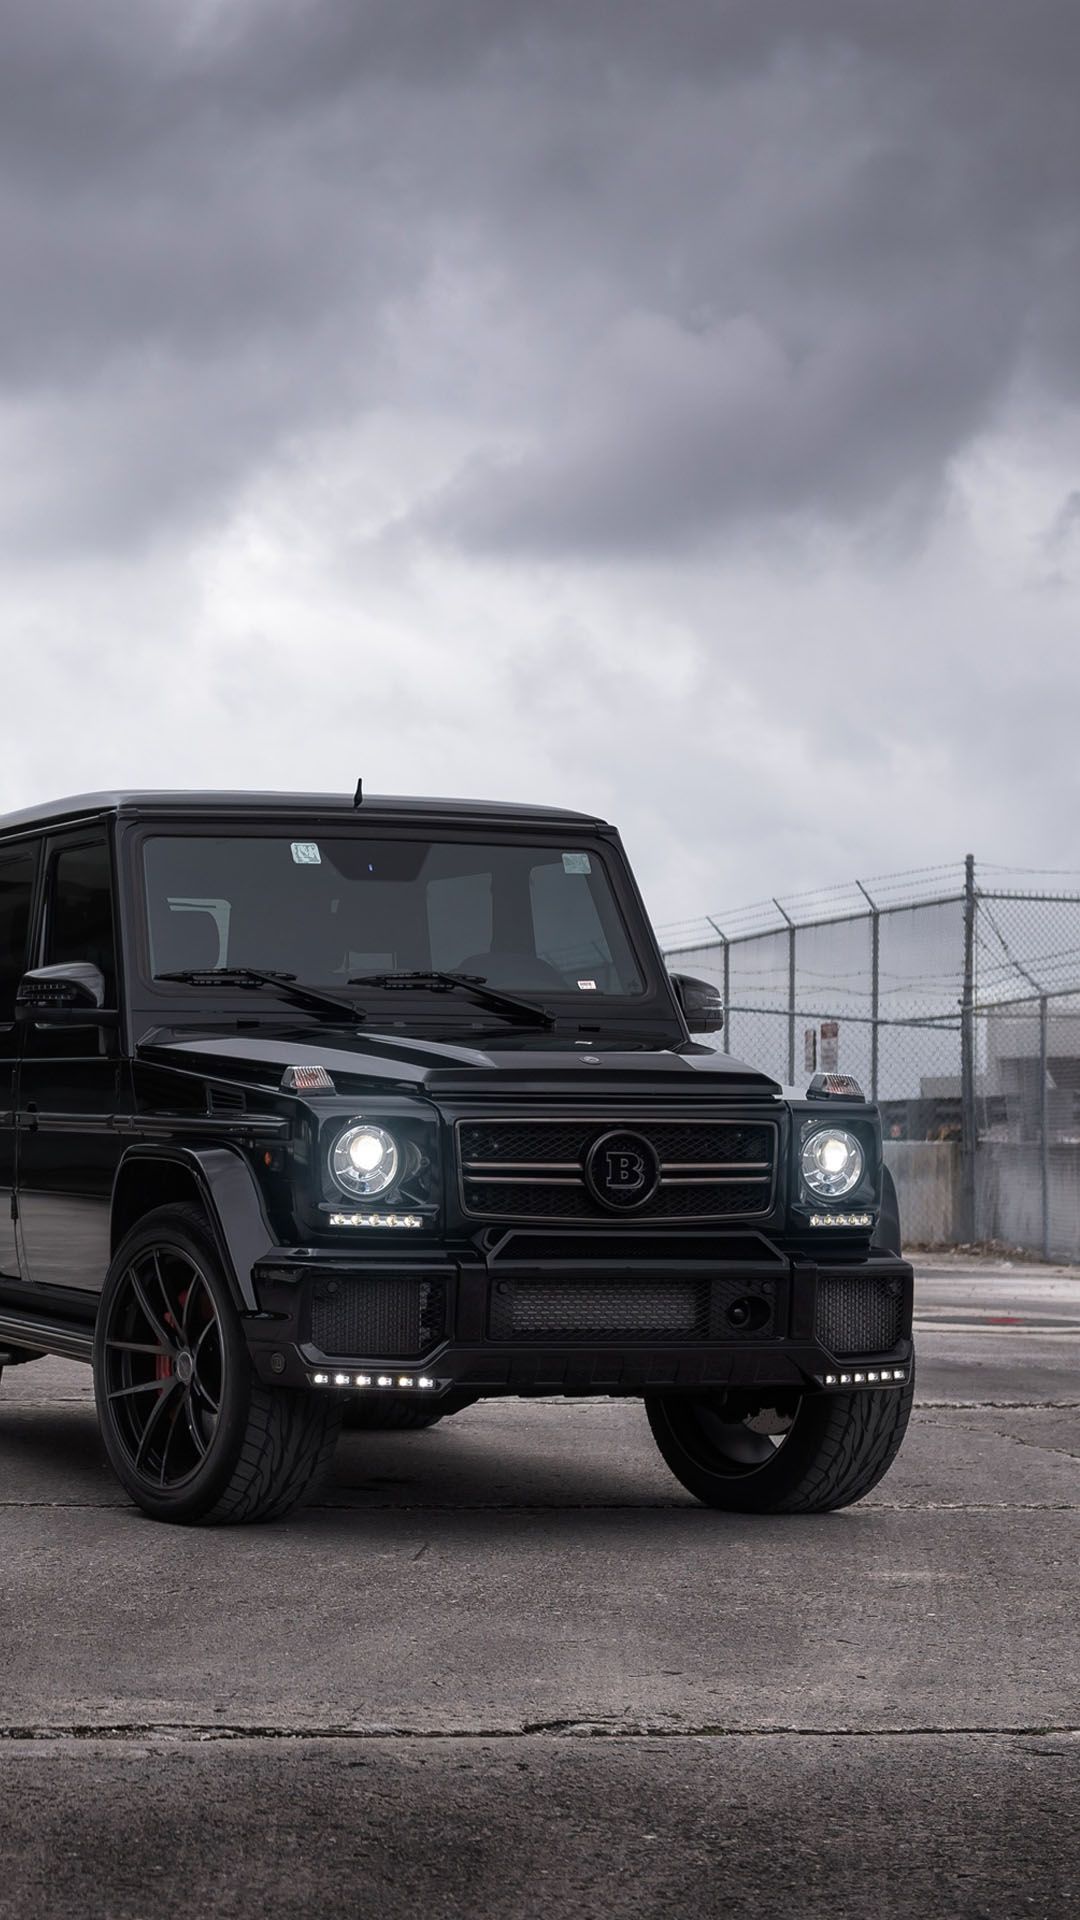 Mercedes Benz G63 Amg Black IPhone 6 6 Plus And IPhone 5 4